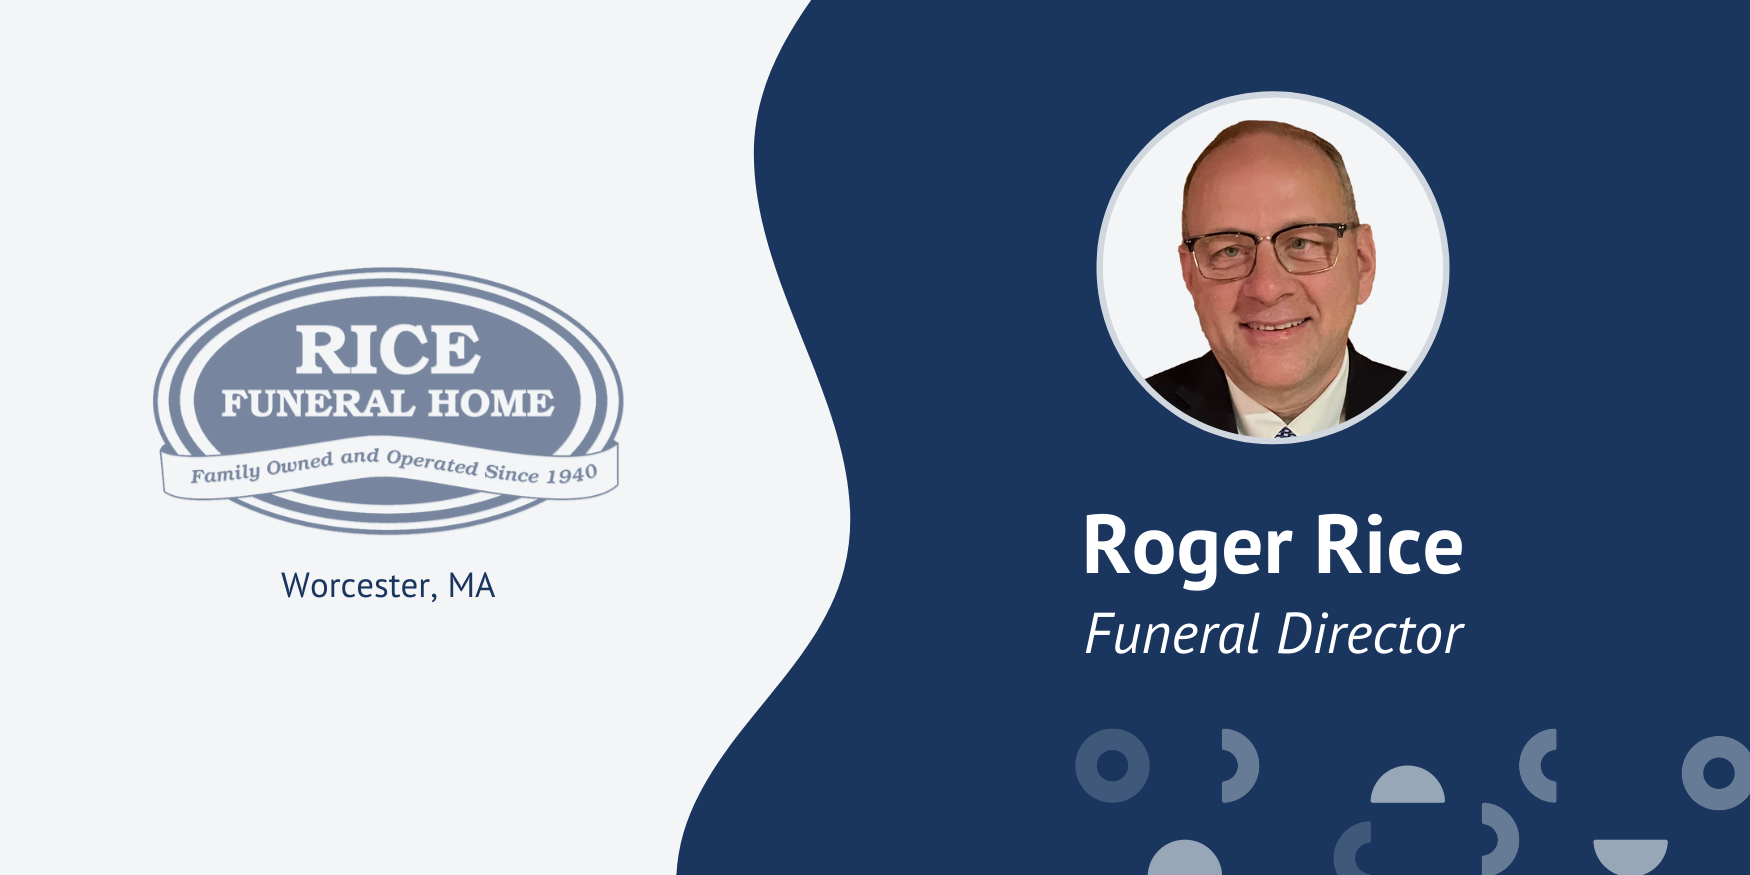 How Rice Funeral Home Got Organized with Passare